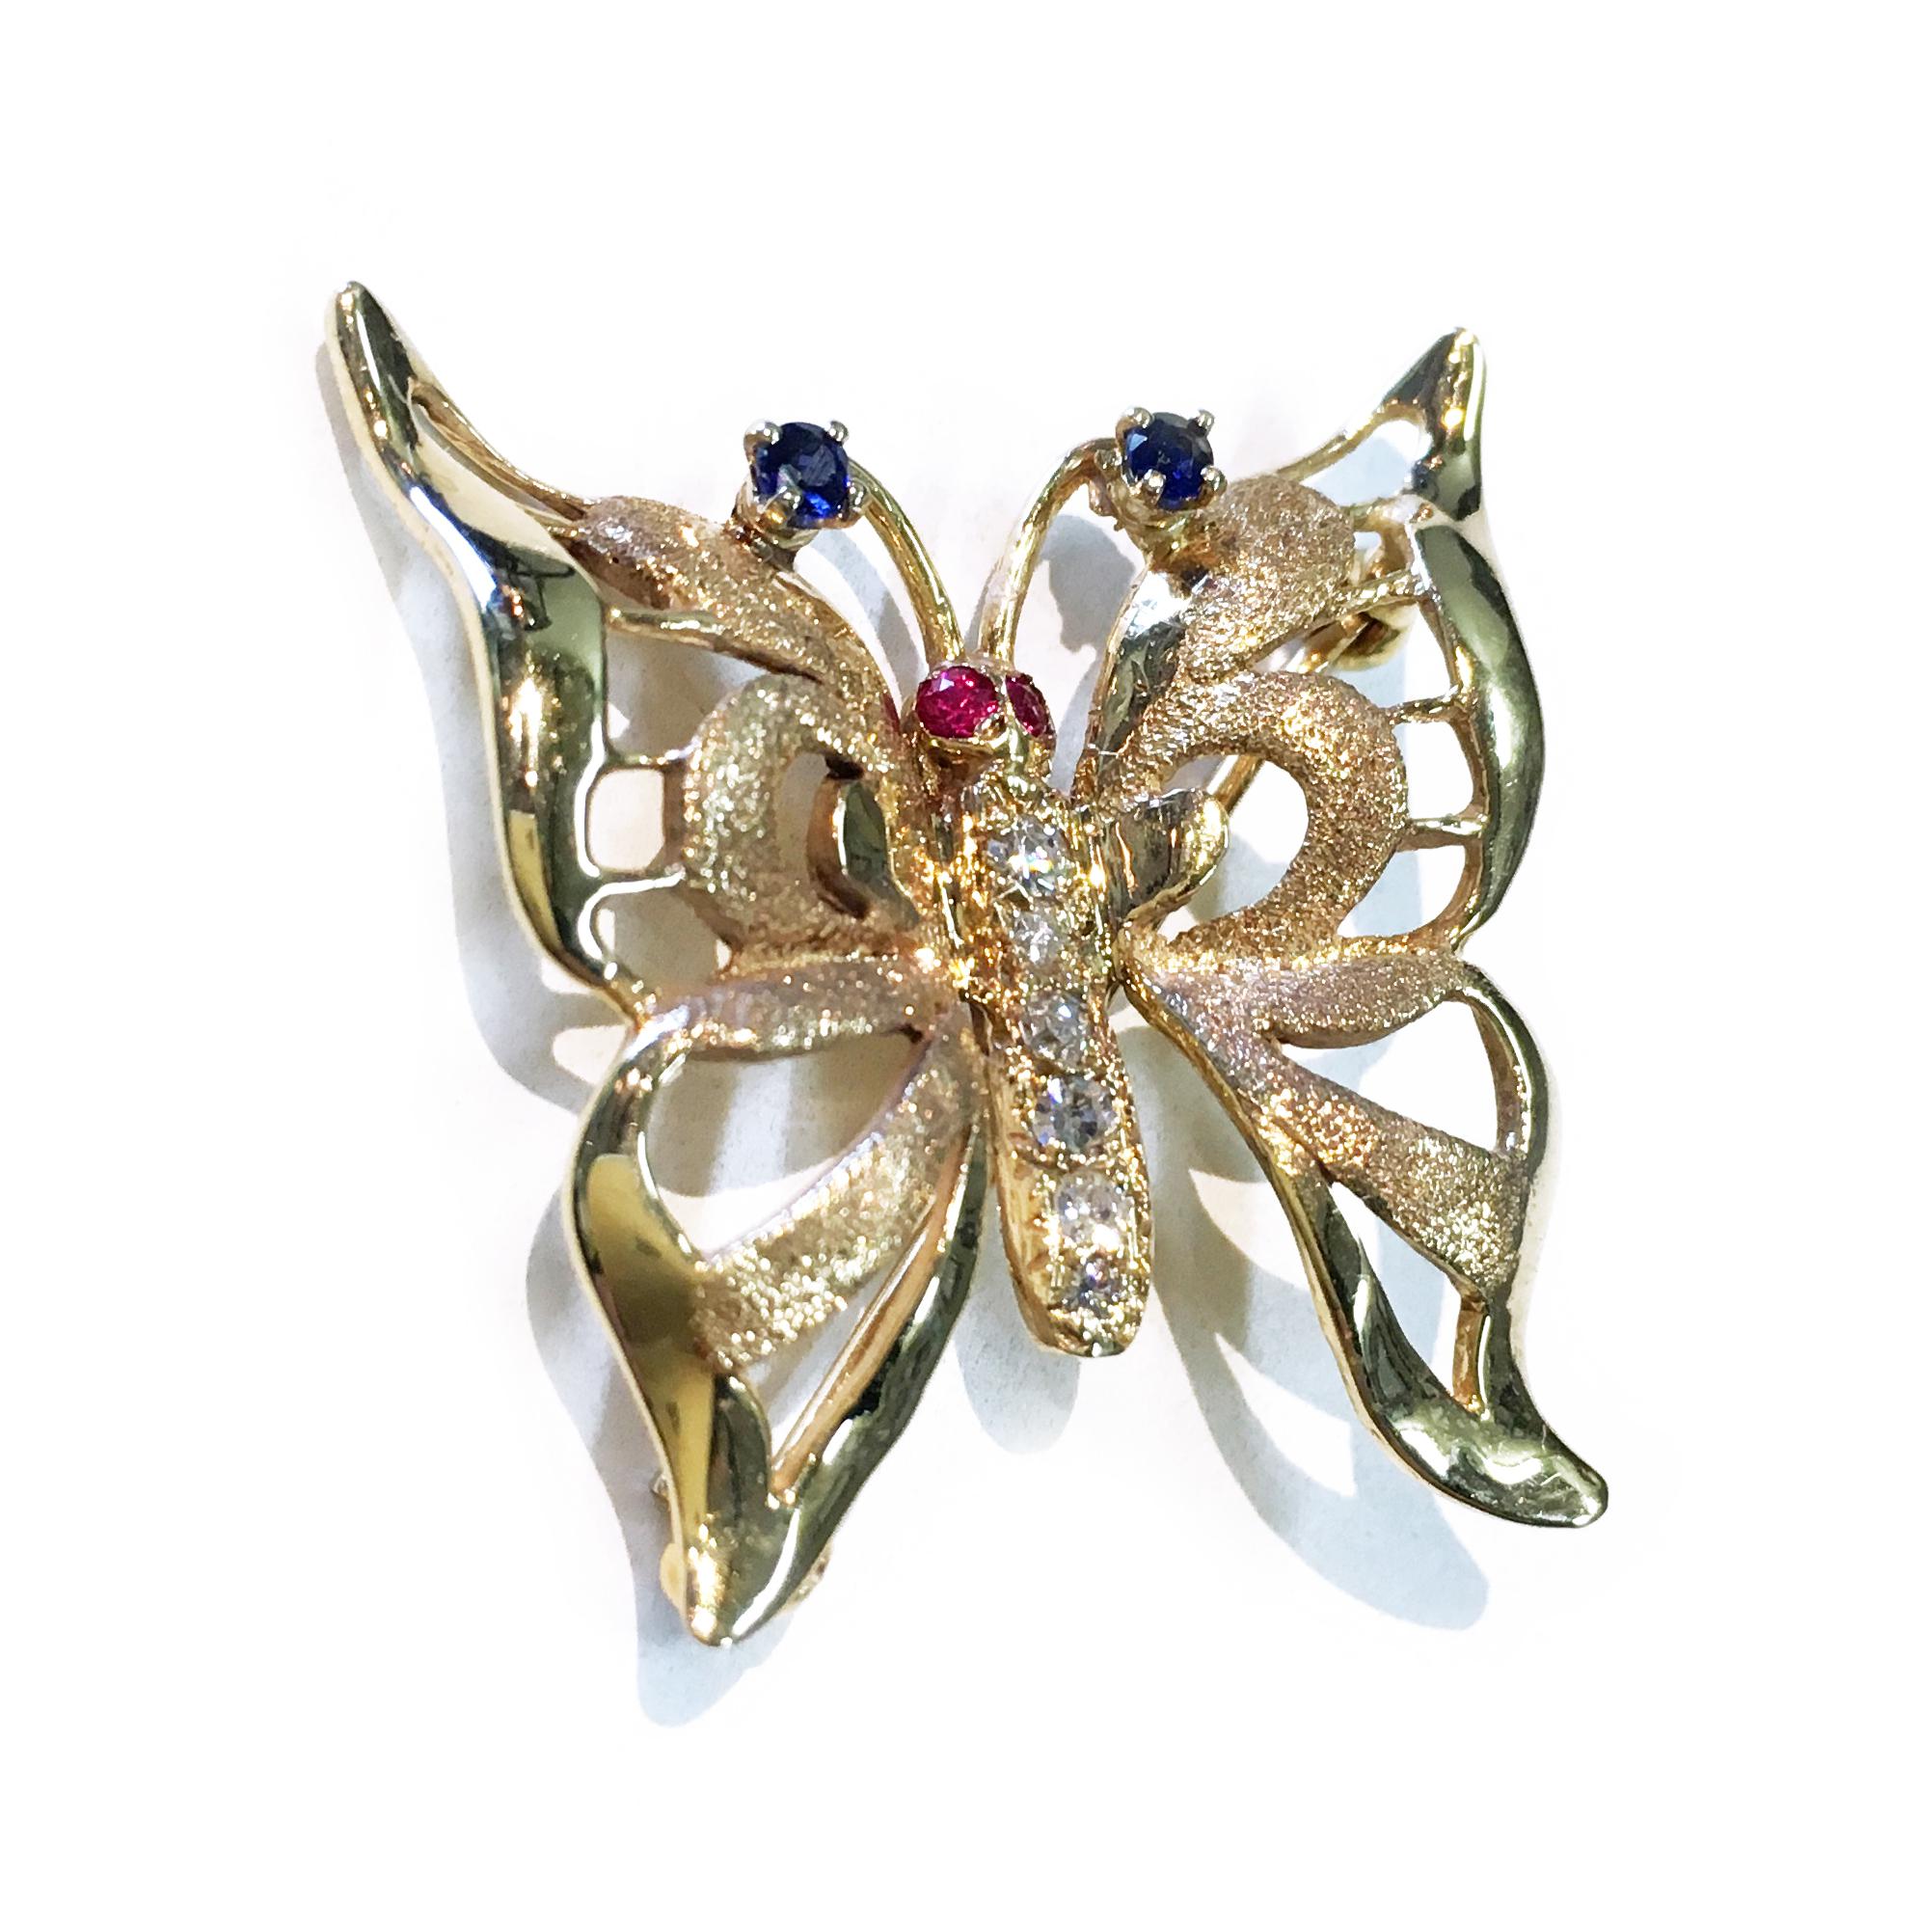 Diamond Ruby Sapphire Butterfly Brooch/Pin. Six round diamonds are bead-set on the body, two round Rubies set in the eyes, and two blue Sapphires prong-set at the tip of the antennae. The diamonds have a total carat weight of 0.20ctw. This lovely